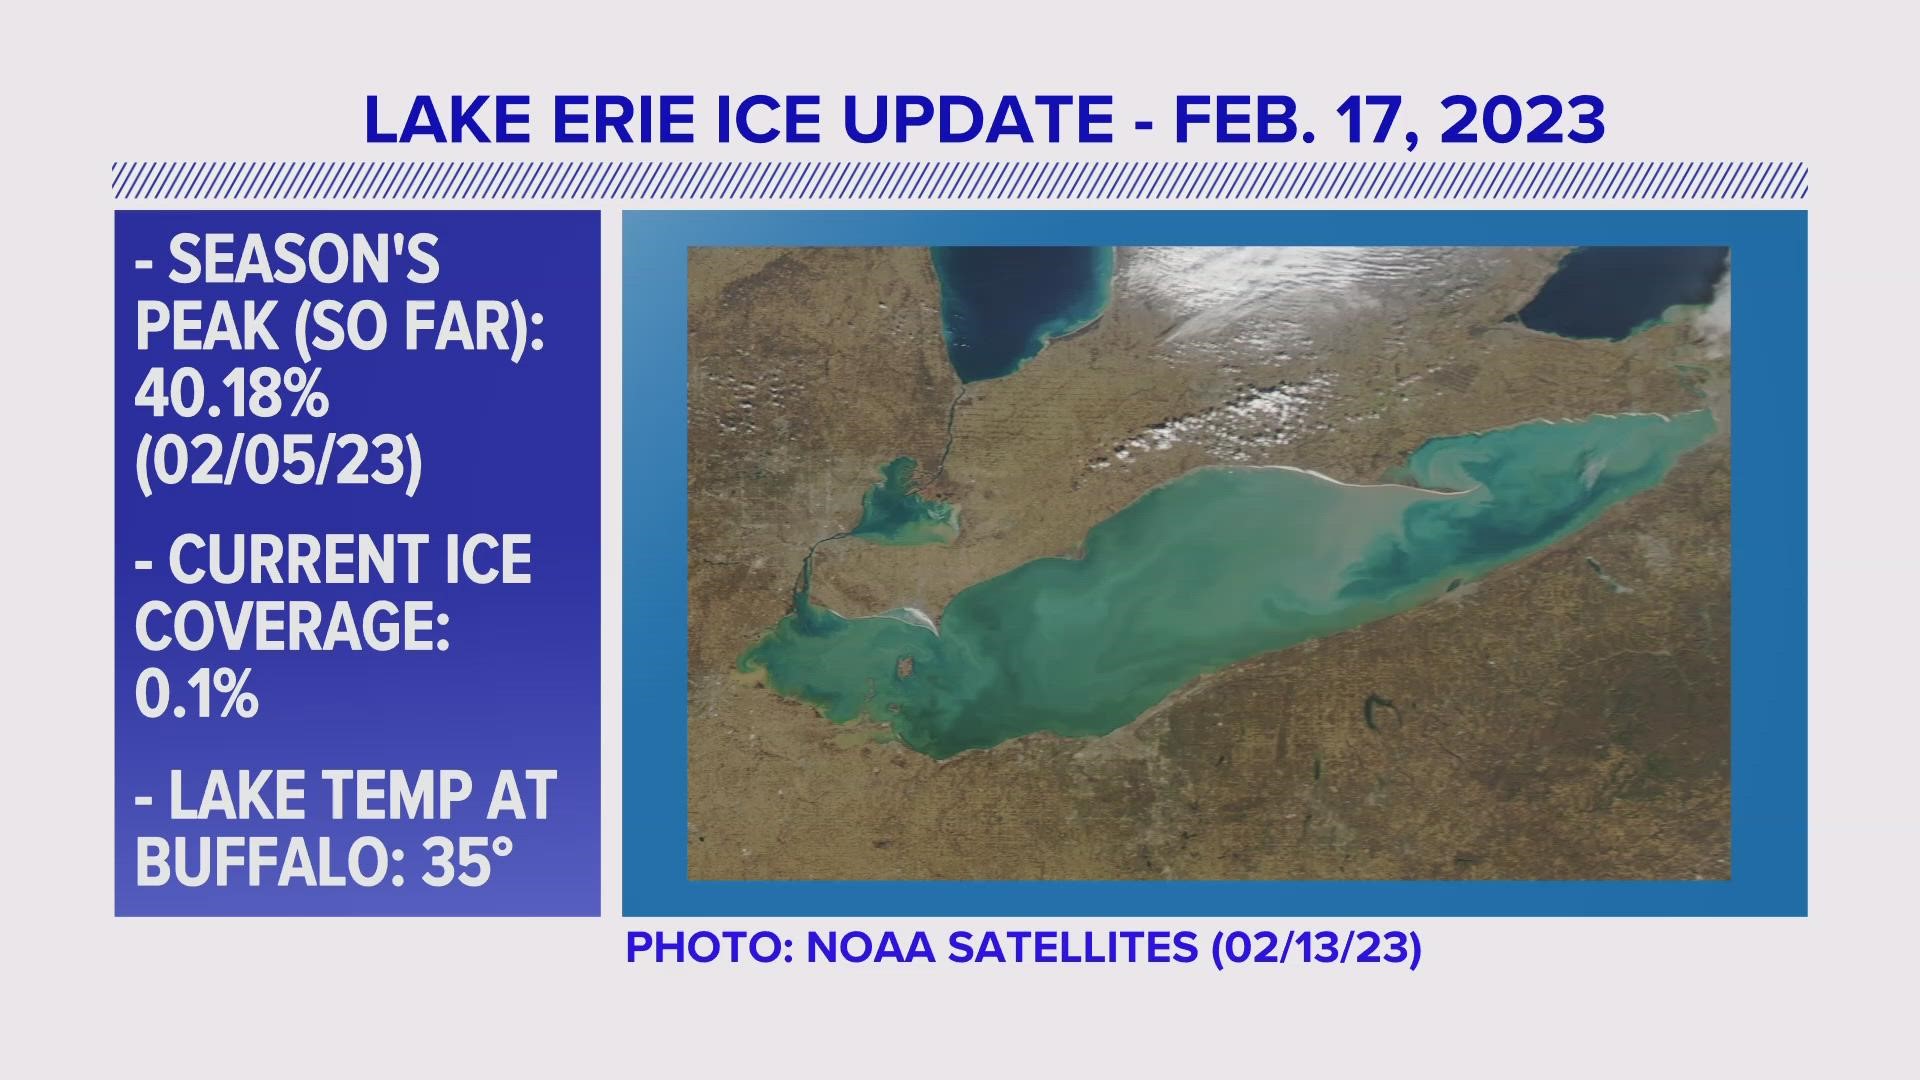 As of Feb. 13, only 7% of the Great Lakes was covered in ice. That's a new record low for mid-February.